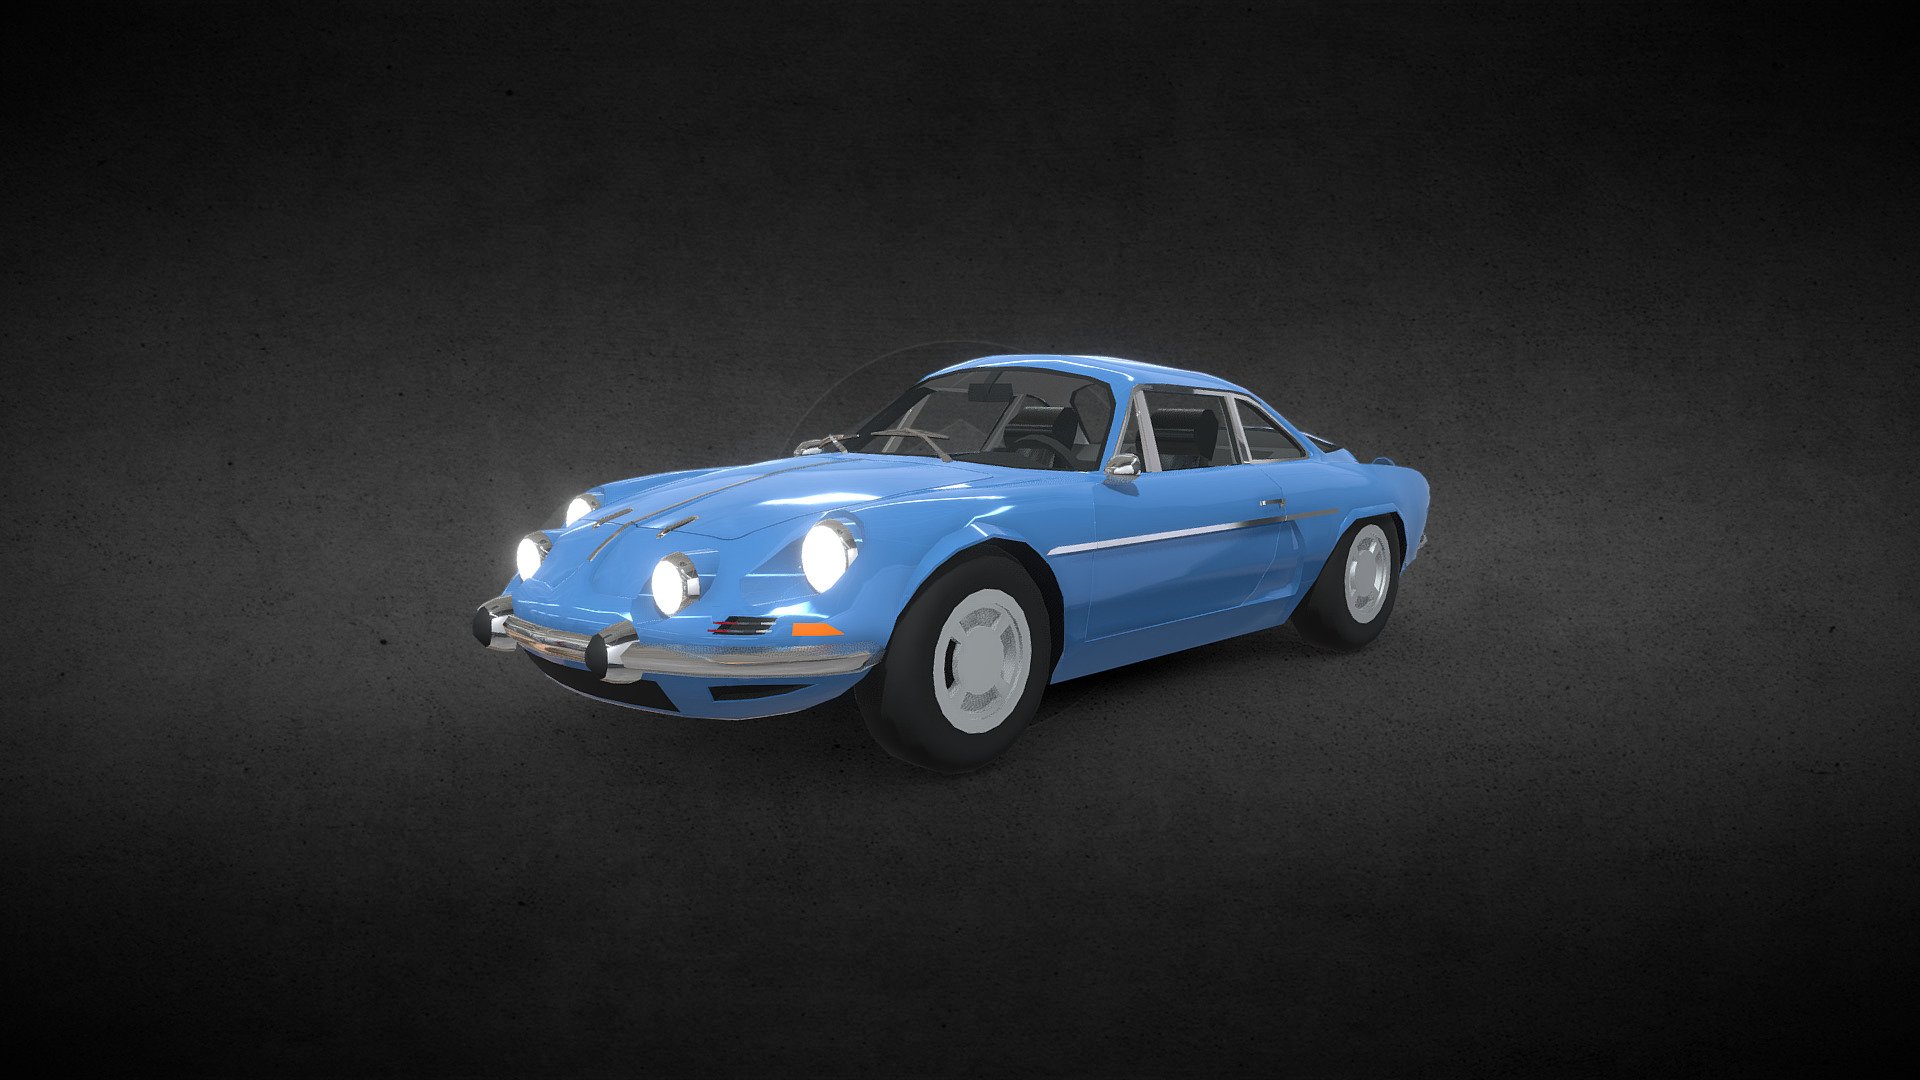 A low poly model of Alpine Renault A110 - french sportscar produced 1963-1974.

Free download.

I hope you'd like it 3d model